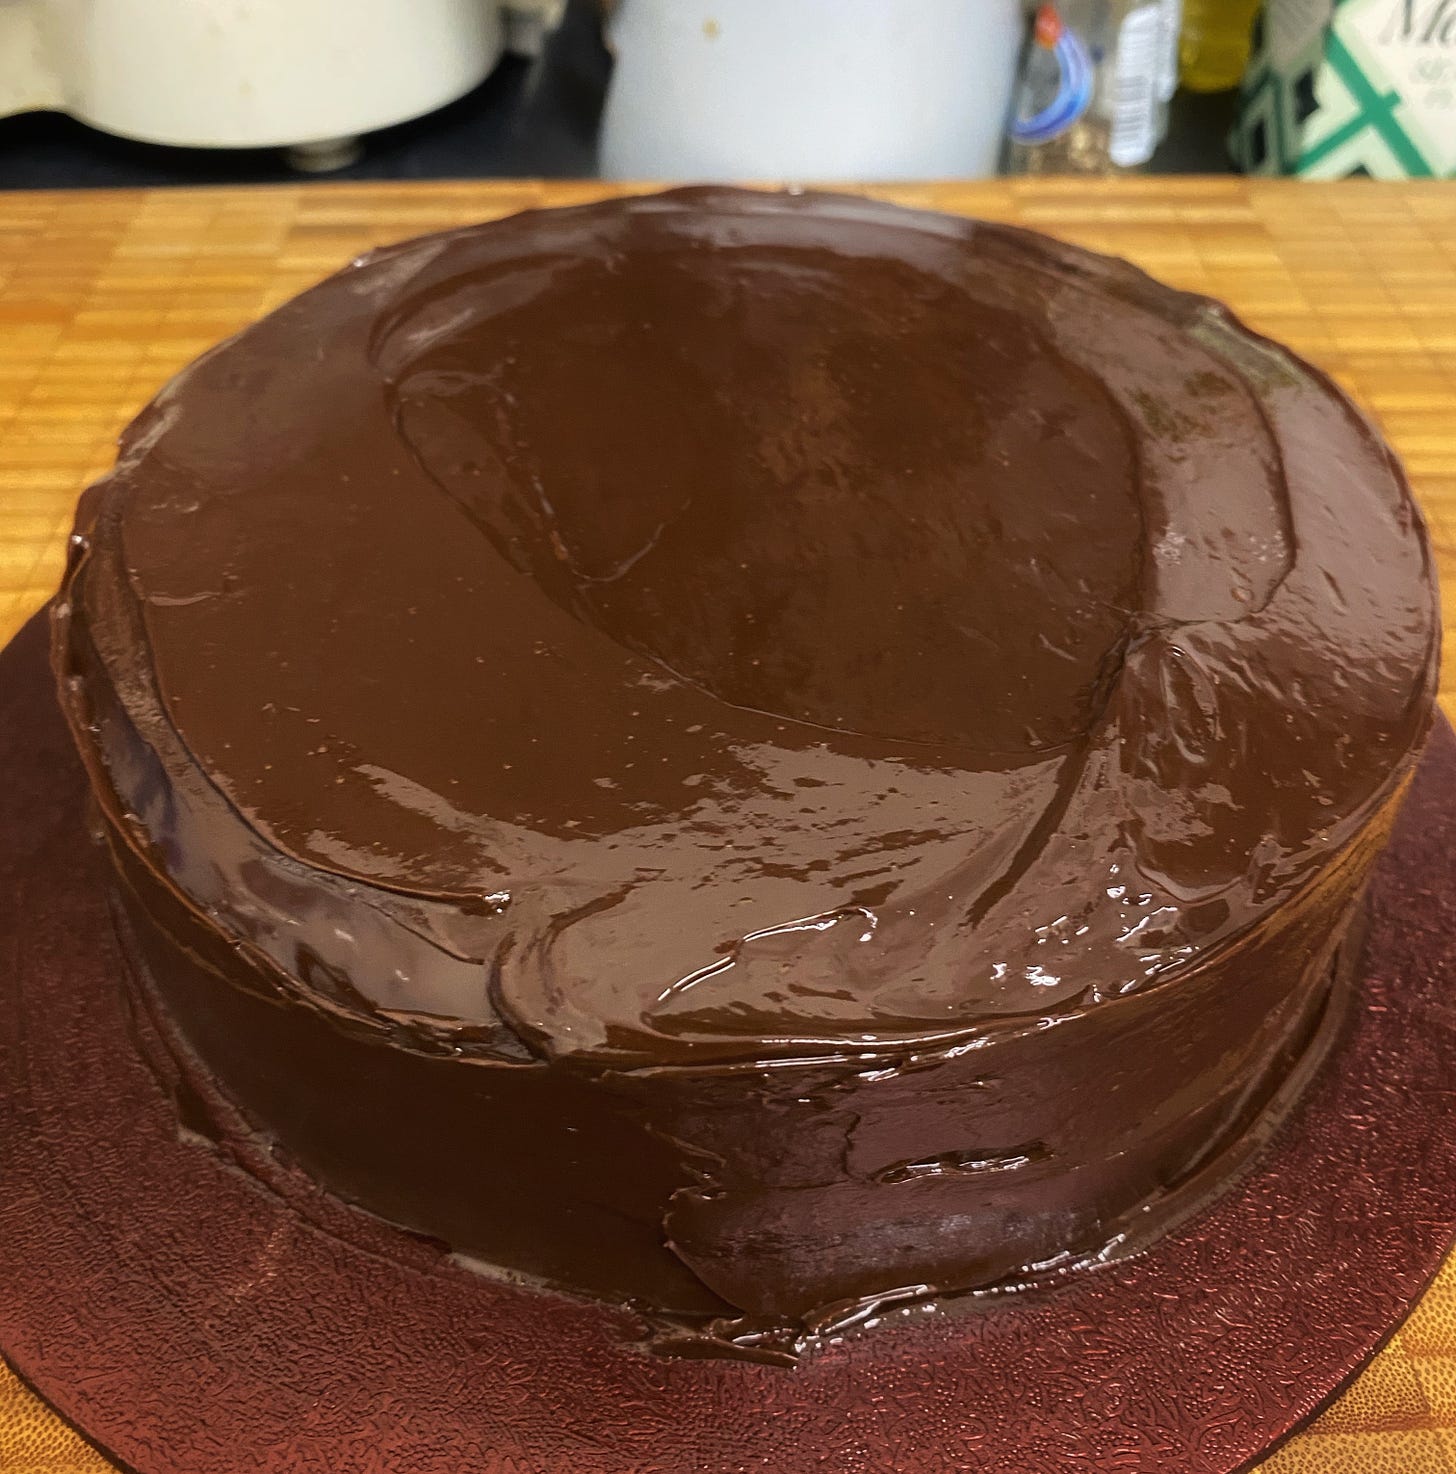 A shiny, ganache-covered chocolate cake that still looks quite messy around the edges